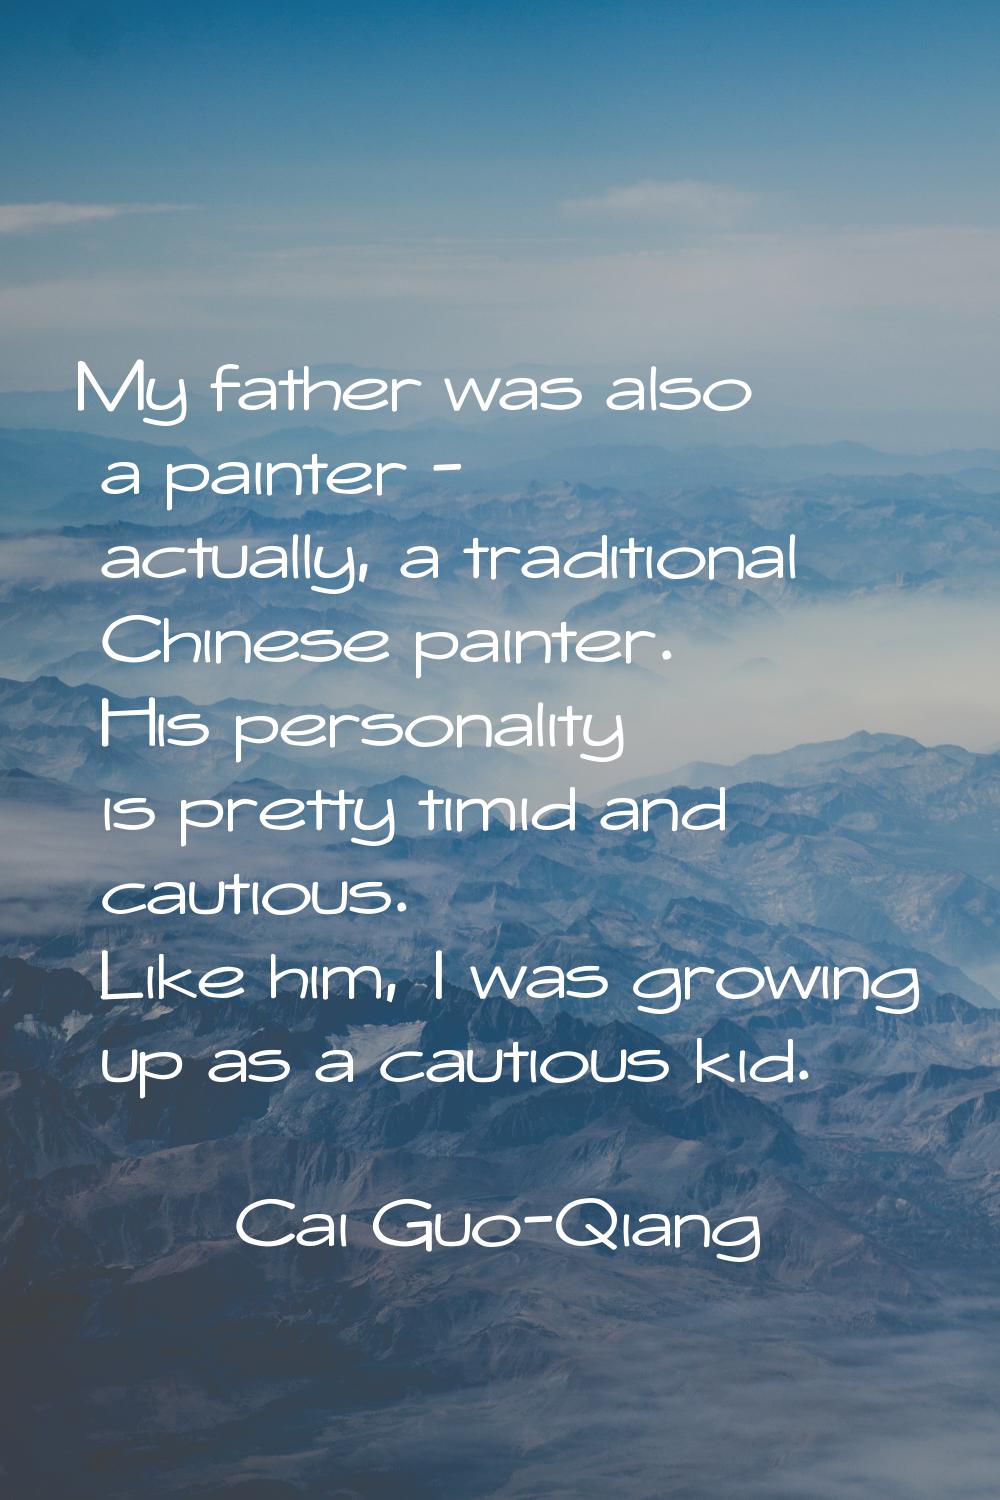 My father was also a painter - actually, a traditional Chinese painter. His personality is pretty t